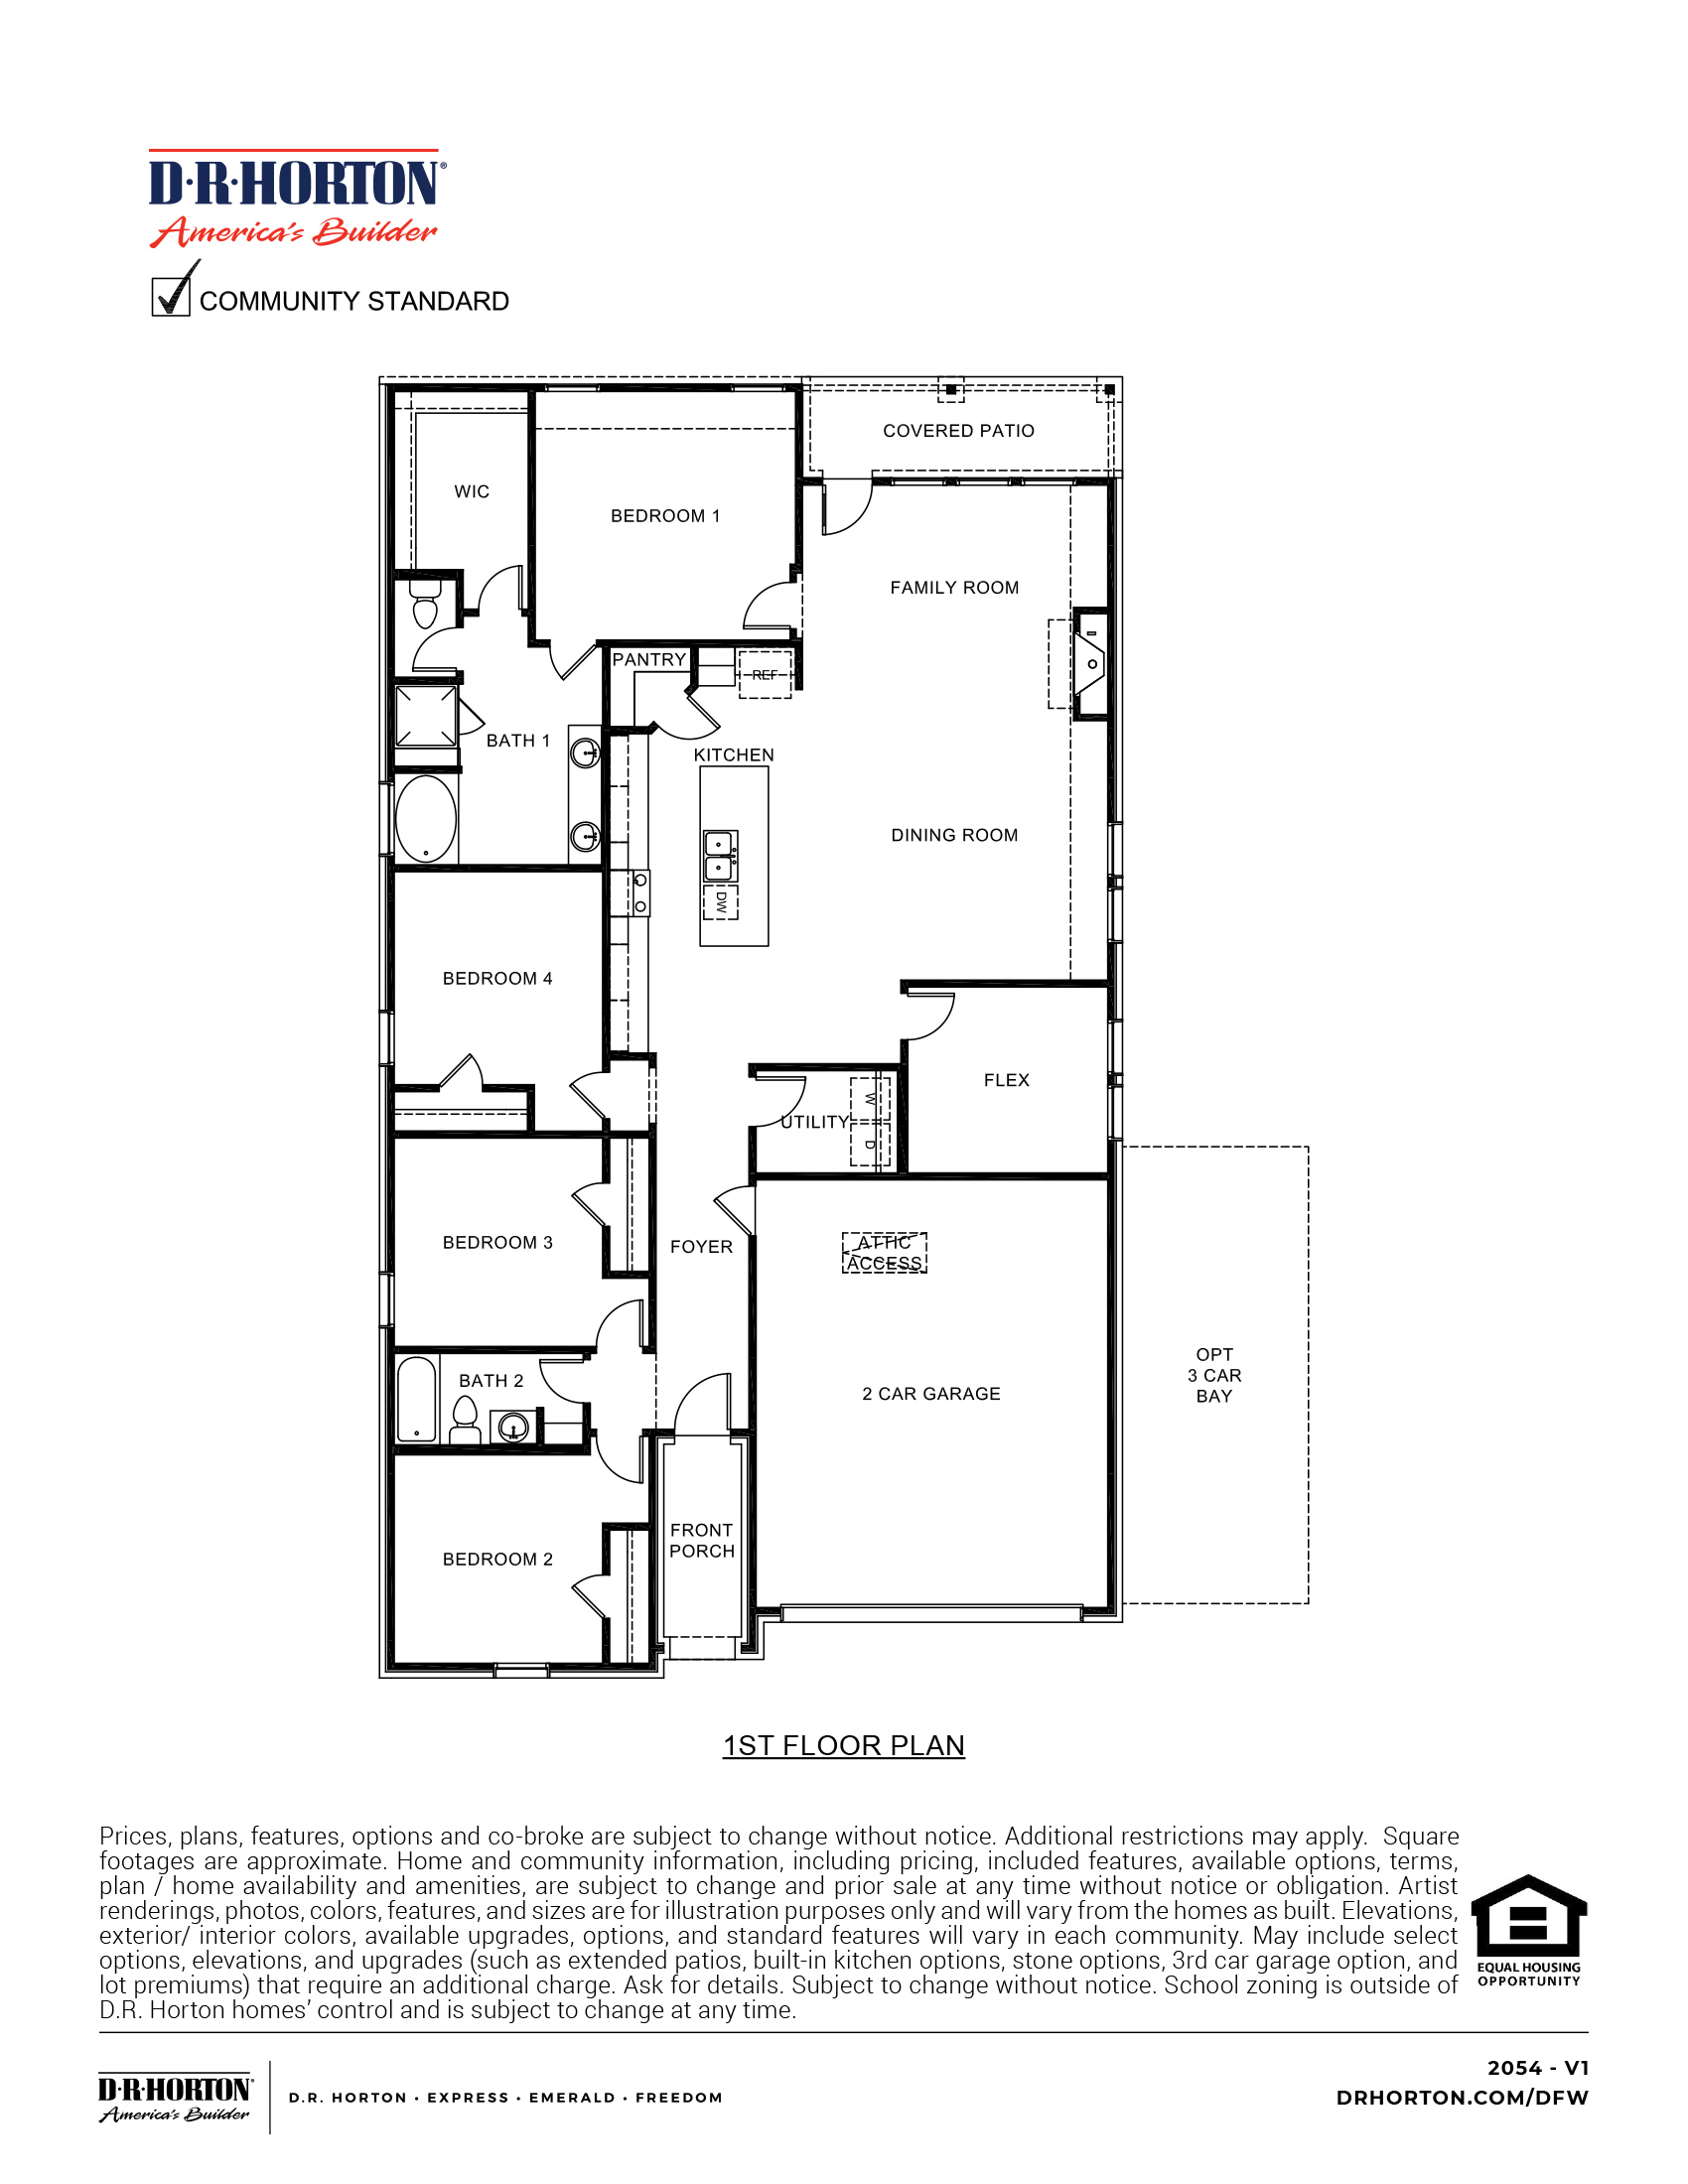 2054 Vail floorplan rendering - the Woods at Lindsey Place in Anna TX